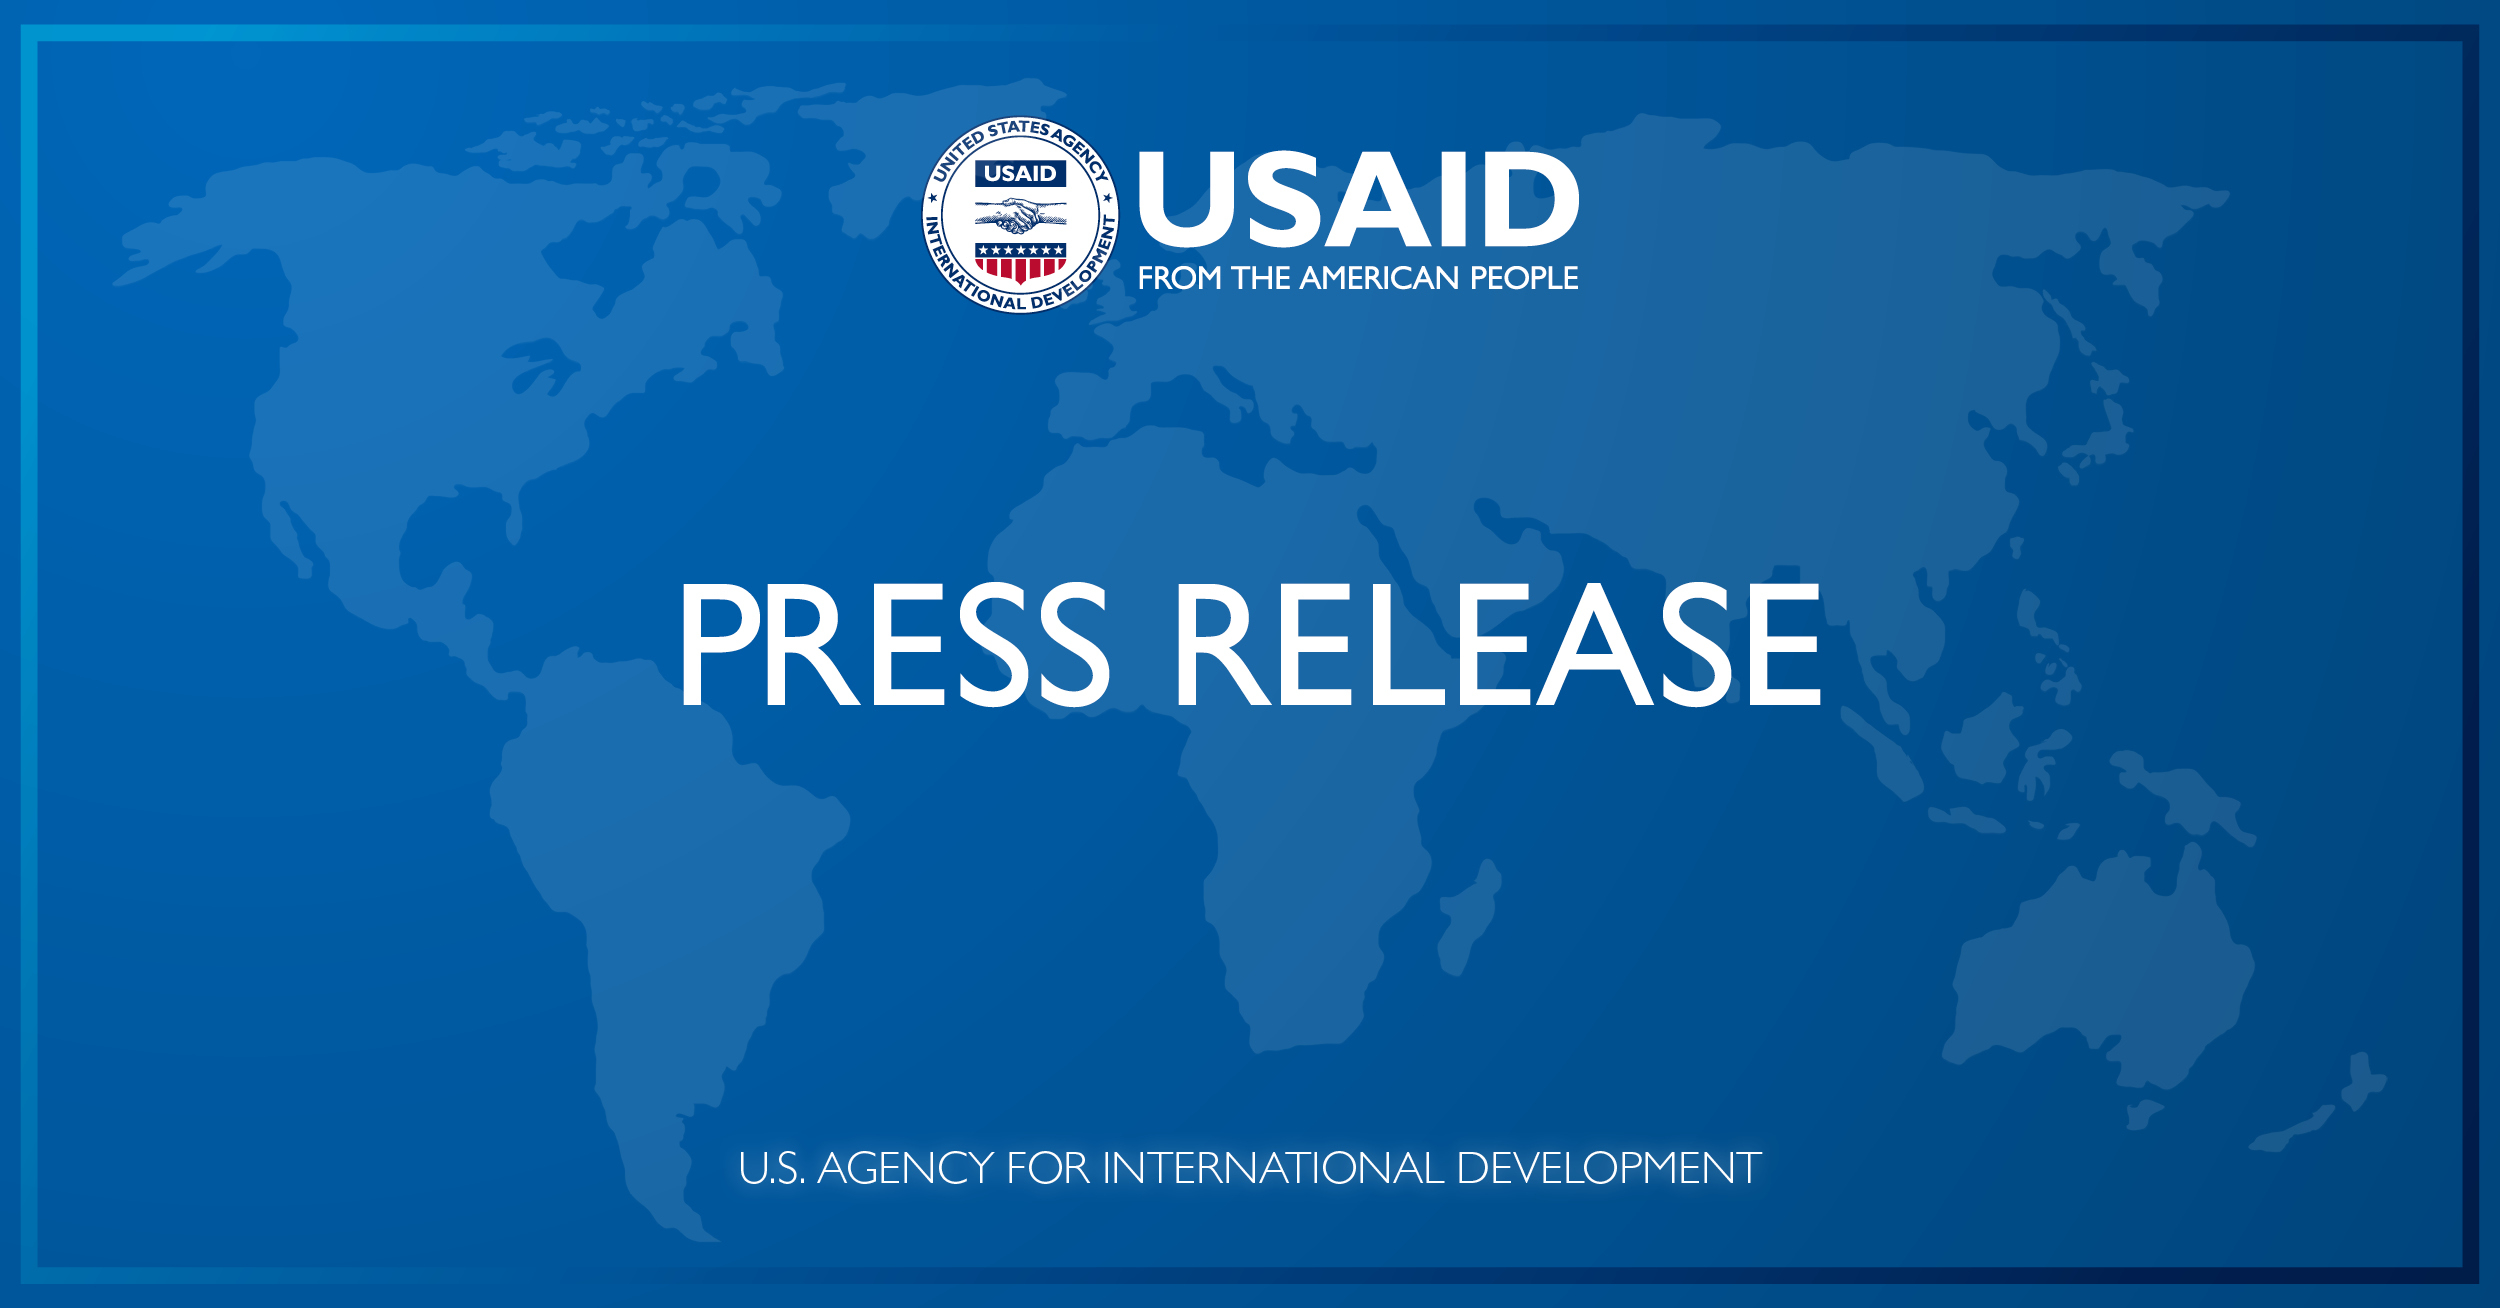 United States gives $82 million in humanitarian aid to Uganda amid global food crisis | Media Release